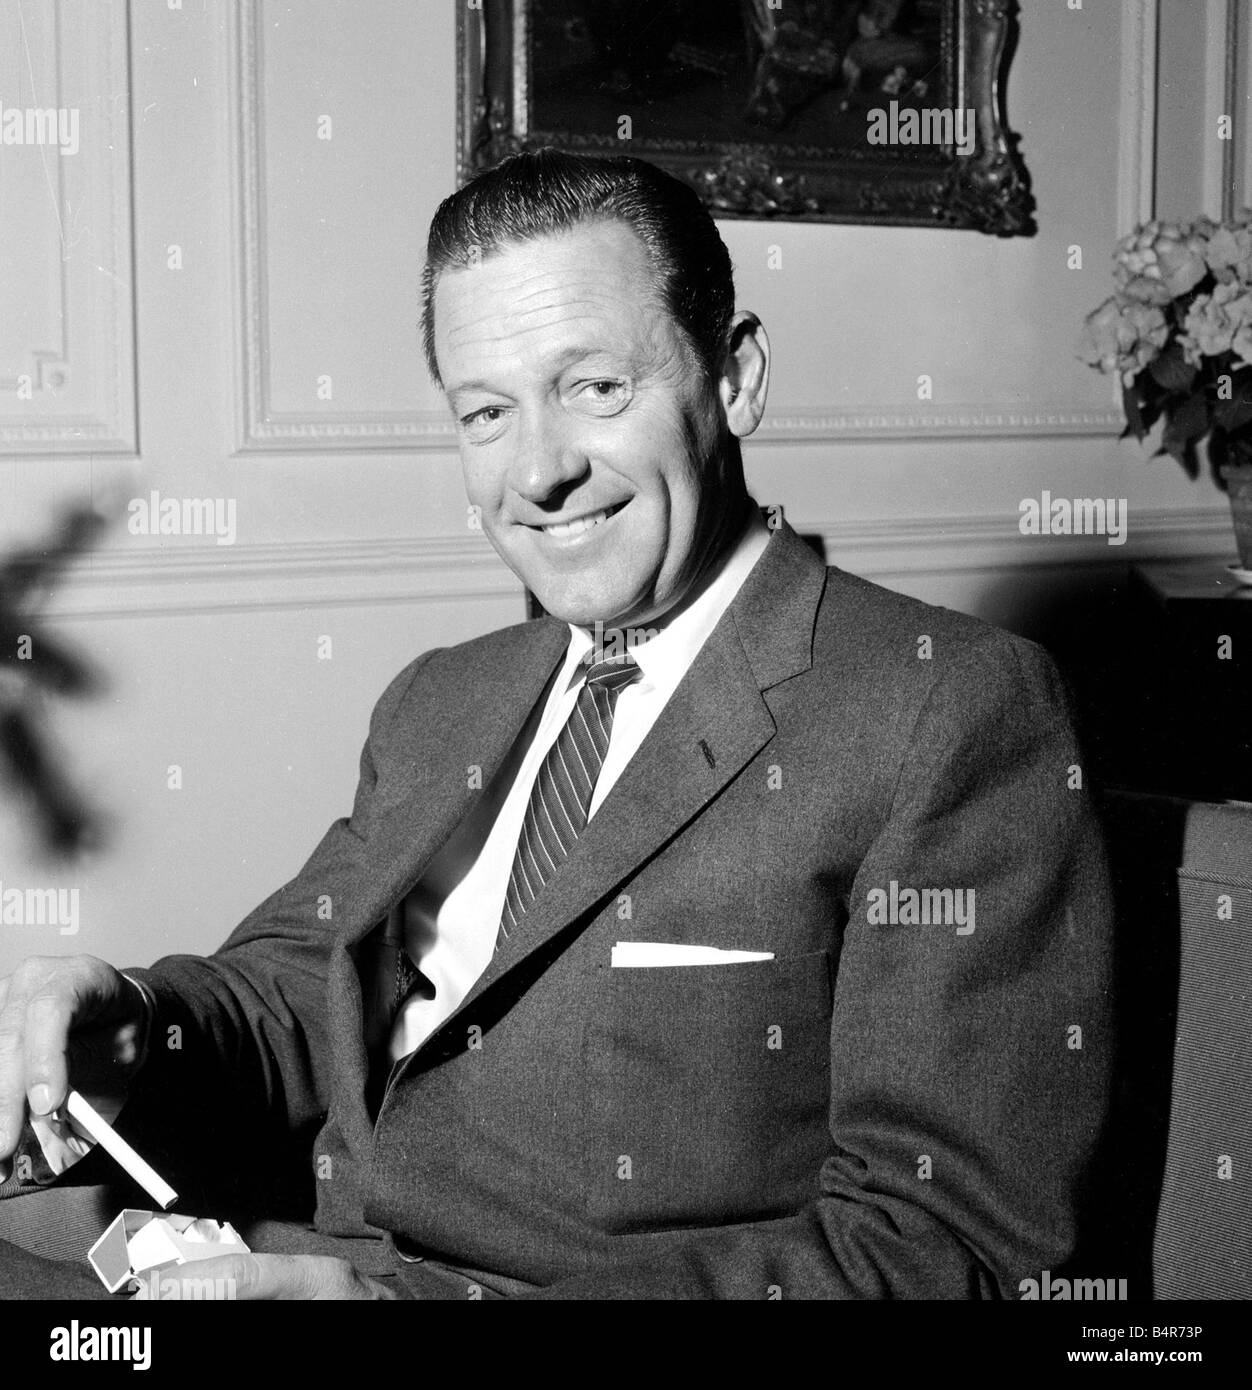 Actor William Holden photographed in his hotel room at the Connaught Hotel while being interviewed May 1957 Stock Photo